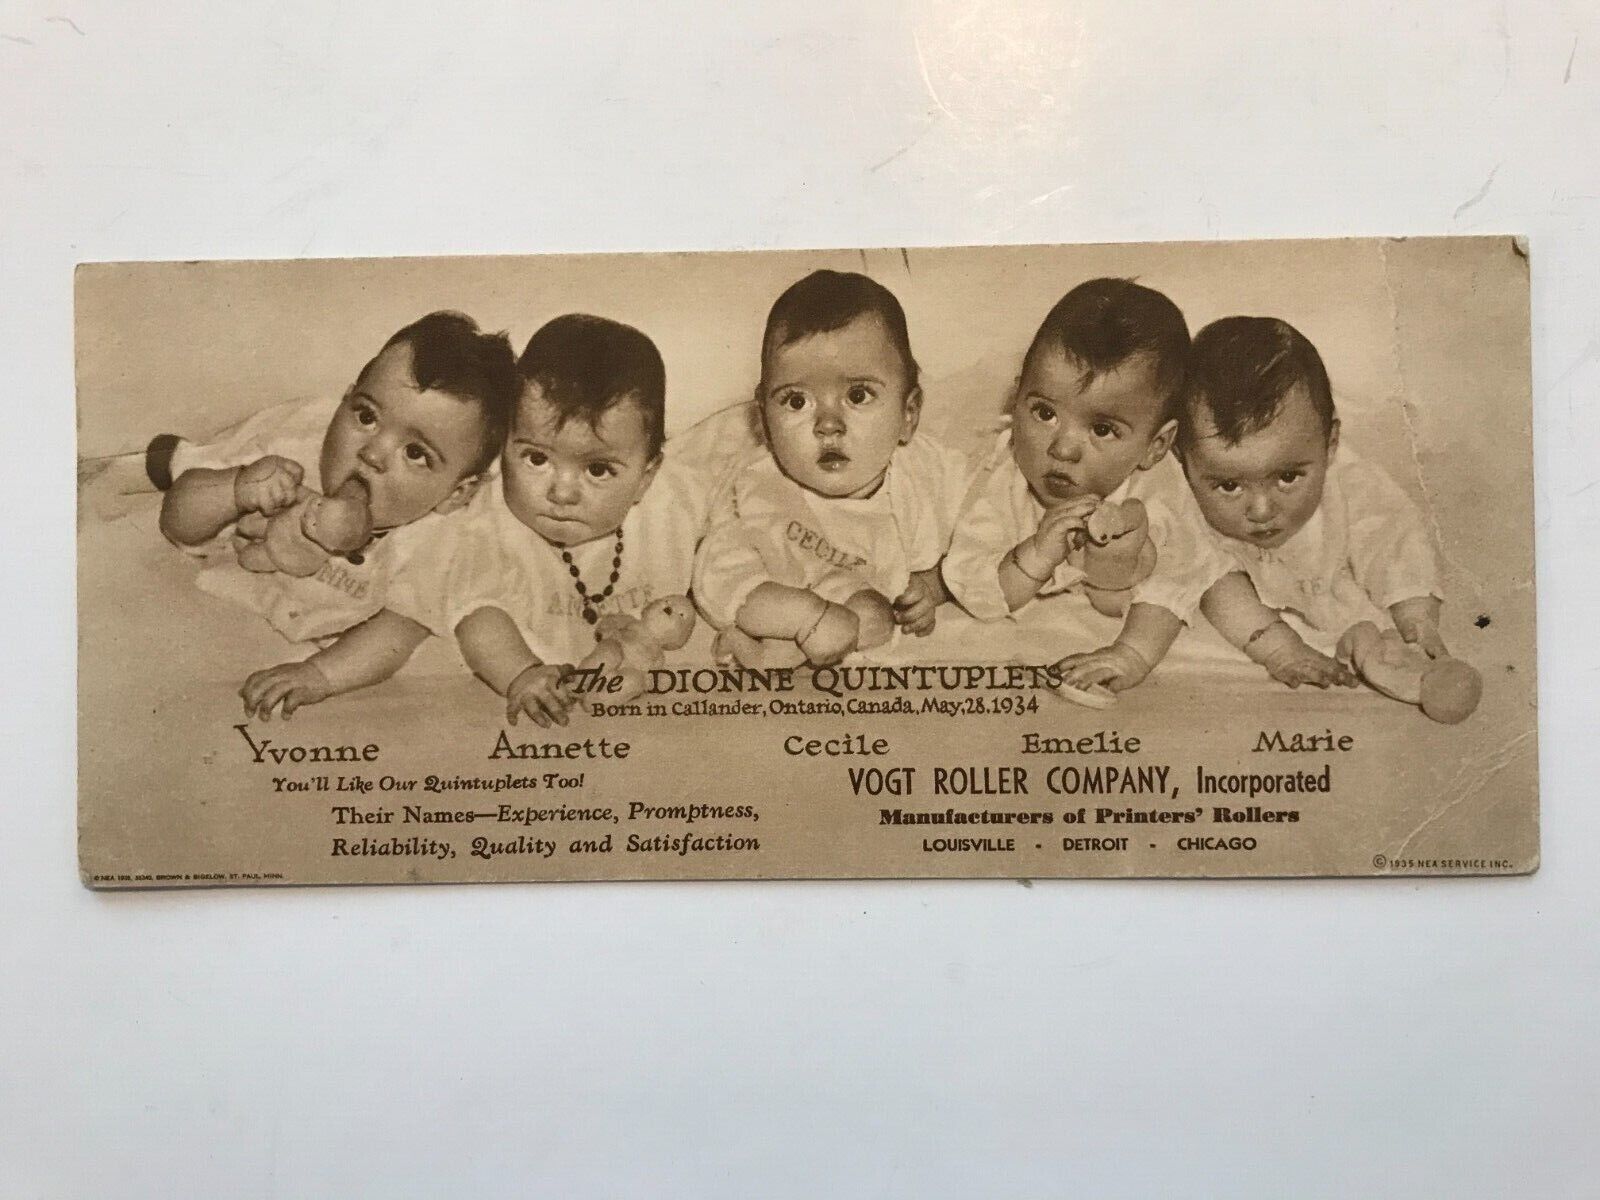 Dionne Quintuplets vintage advertising and calendar covers circa 1935 to 1953